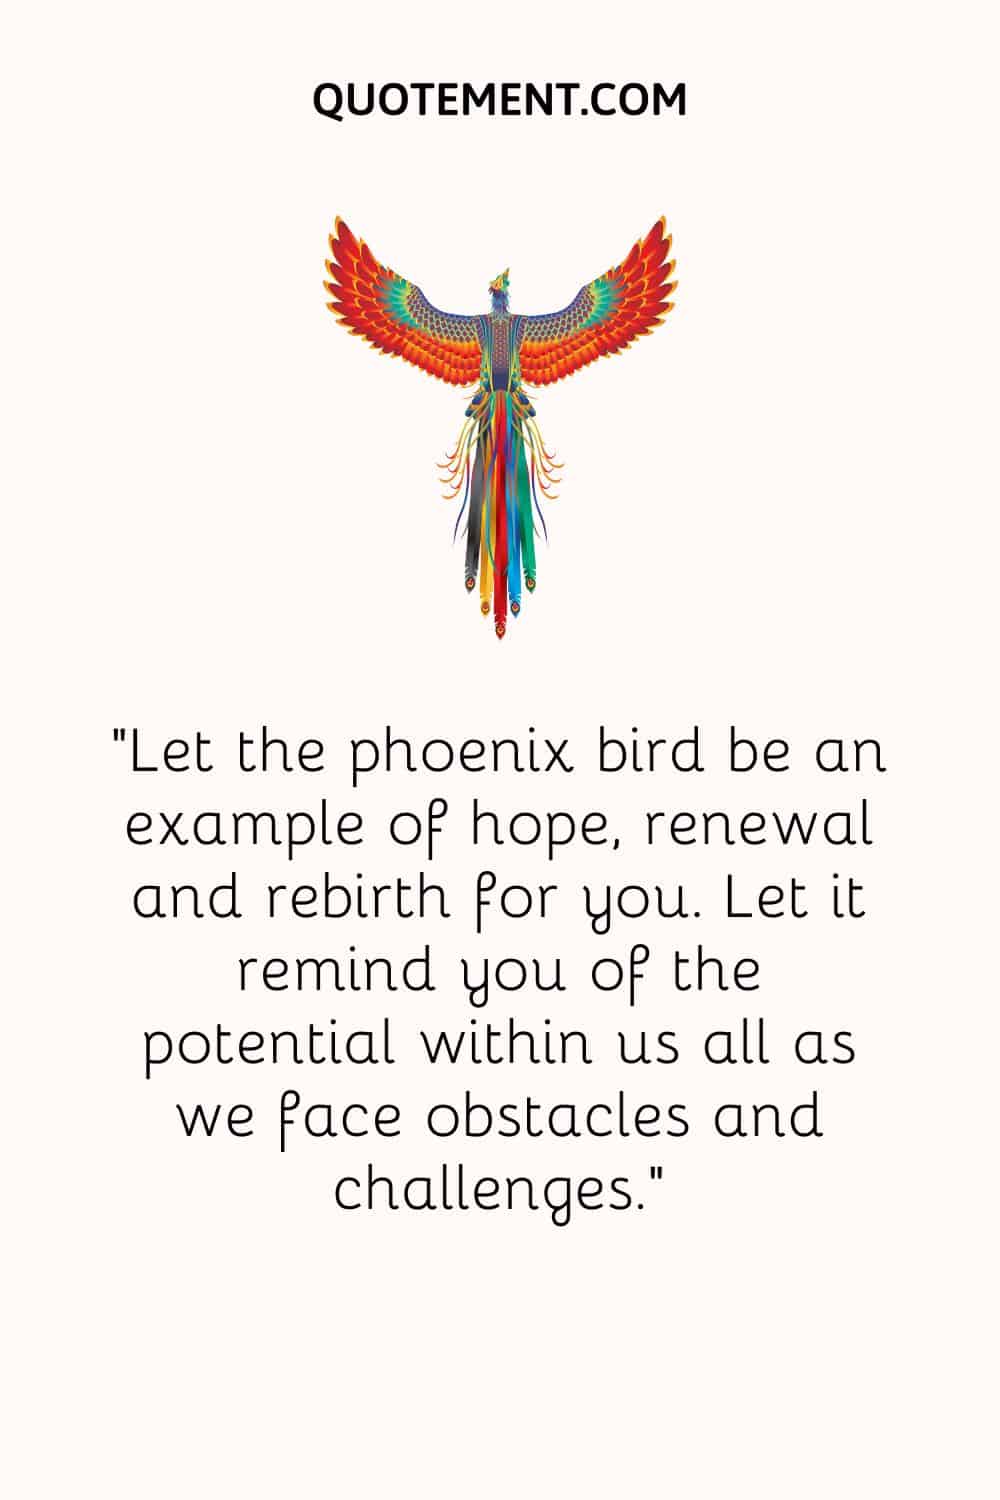 Let the phoenix bird be an example of hope, renewal and rebirth for you